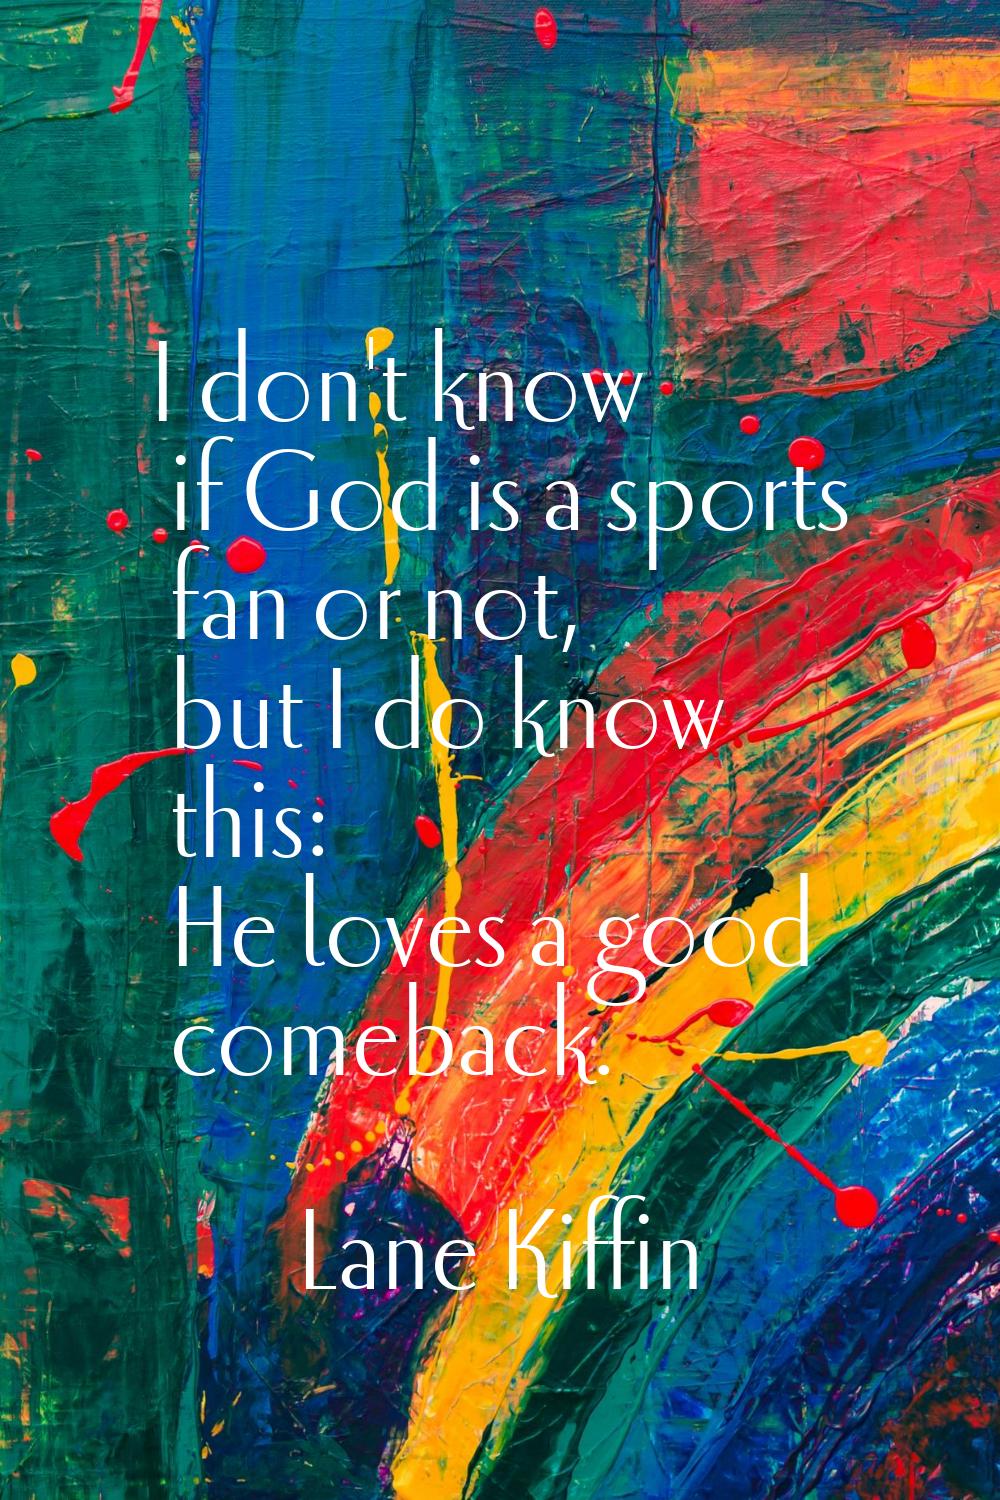 I don't know if God is a sports fan or not, but I do know this: He loves a good comeback.